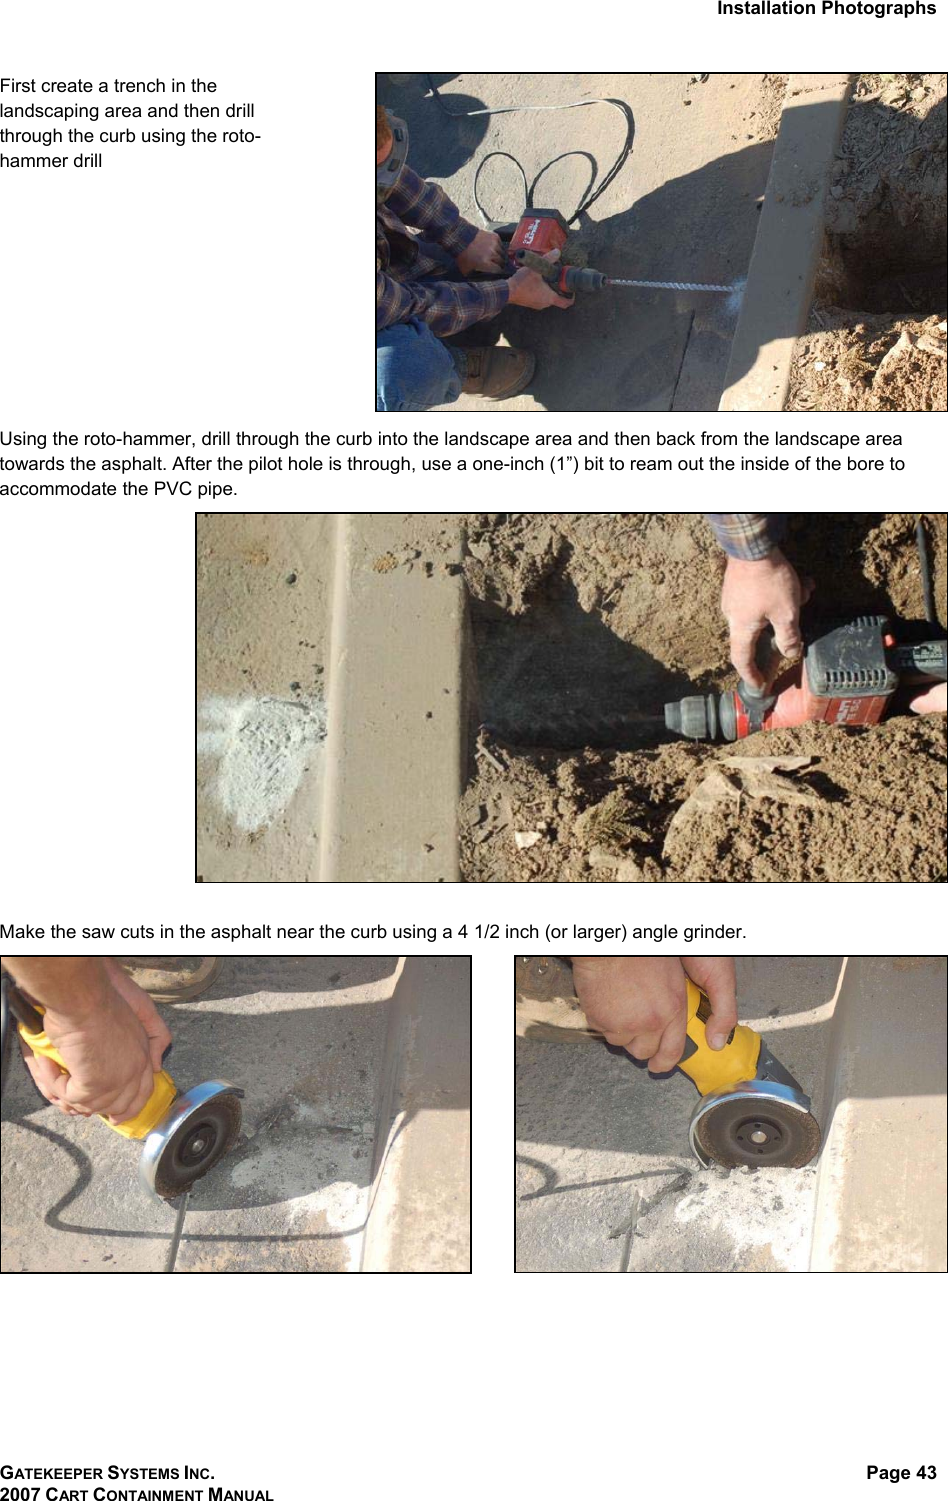 Installation Photographs GATEKEEPER SYSTEMS INC. 2007 CART CONTAINMENT MANUAL Page 43  First create a trench in the landscaping area and then drill through the curb using the roto-hammer drill  Using the roto-hammer, drill through the curb into the landscape area and then back from the landscape area towards the asphalt. After the pilot hole is through, use a one-inch (1”) bit to ream out the inside of the bore to accommodate the PVC pipe.   Make the saw cuts in the asphalt near the curb using a 4 1/2 inch (or larger) angle grinder.     